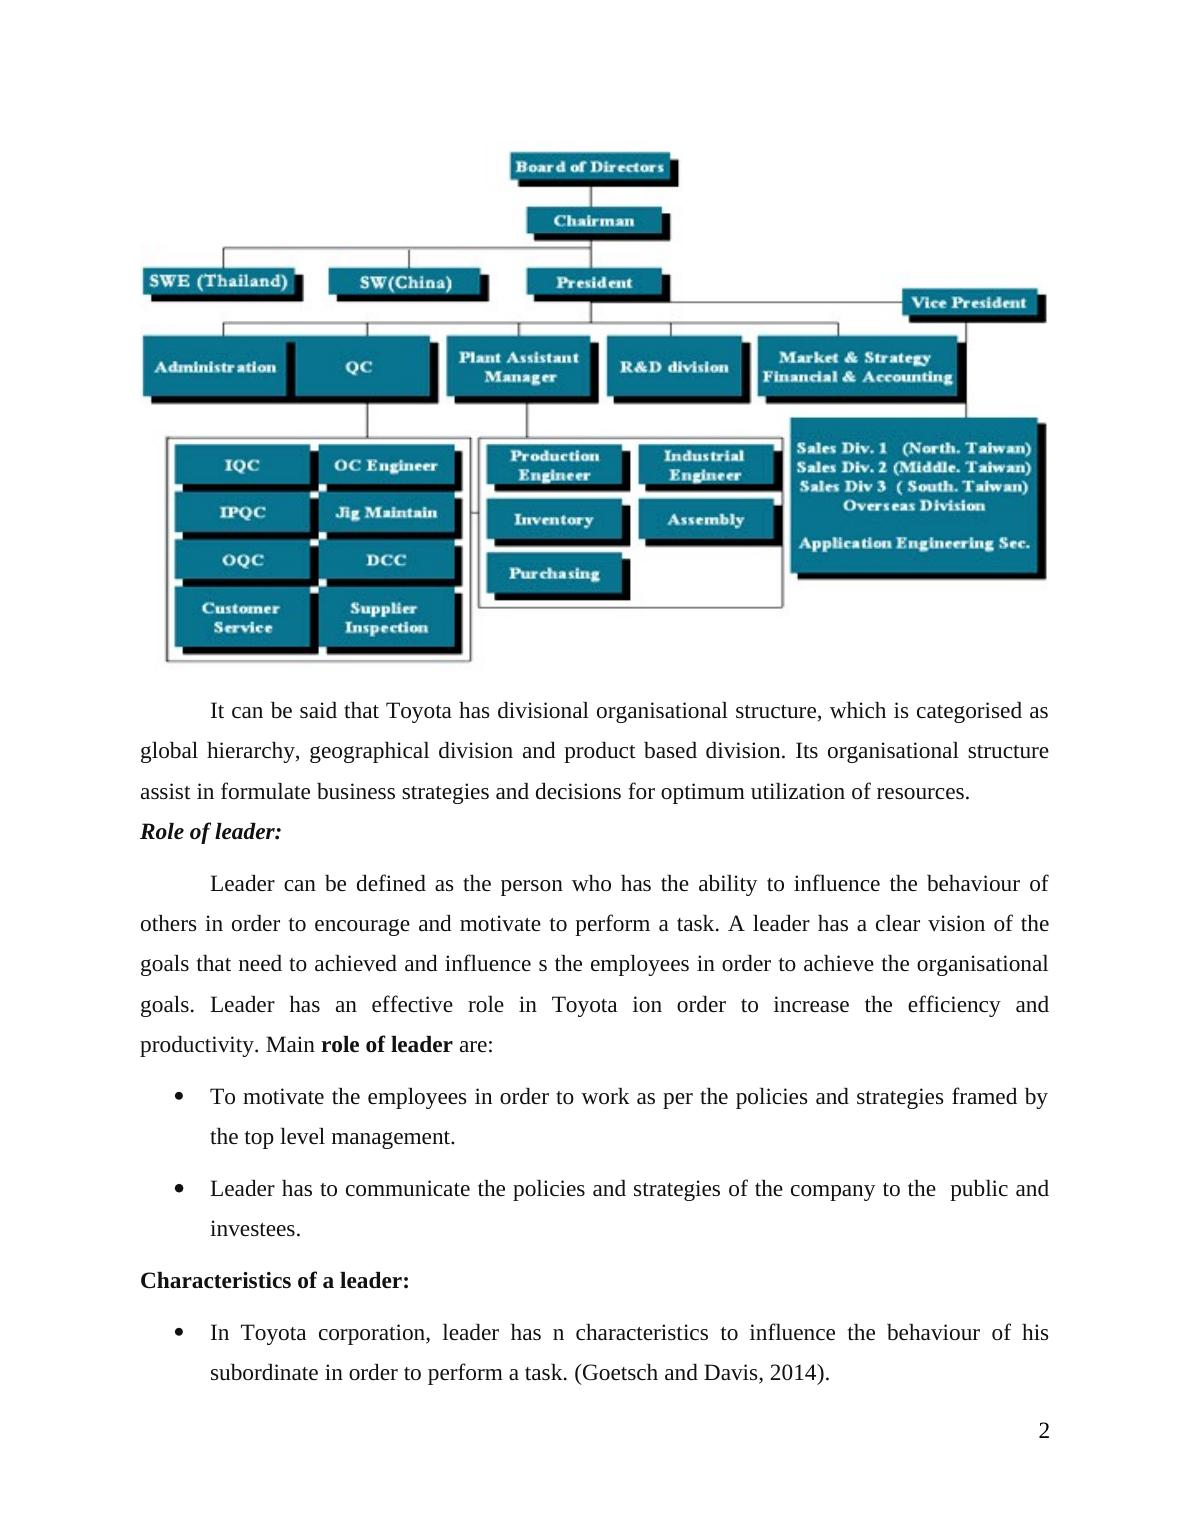 Management & Operations Assignment - Toyota_4